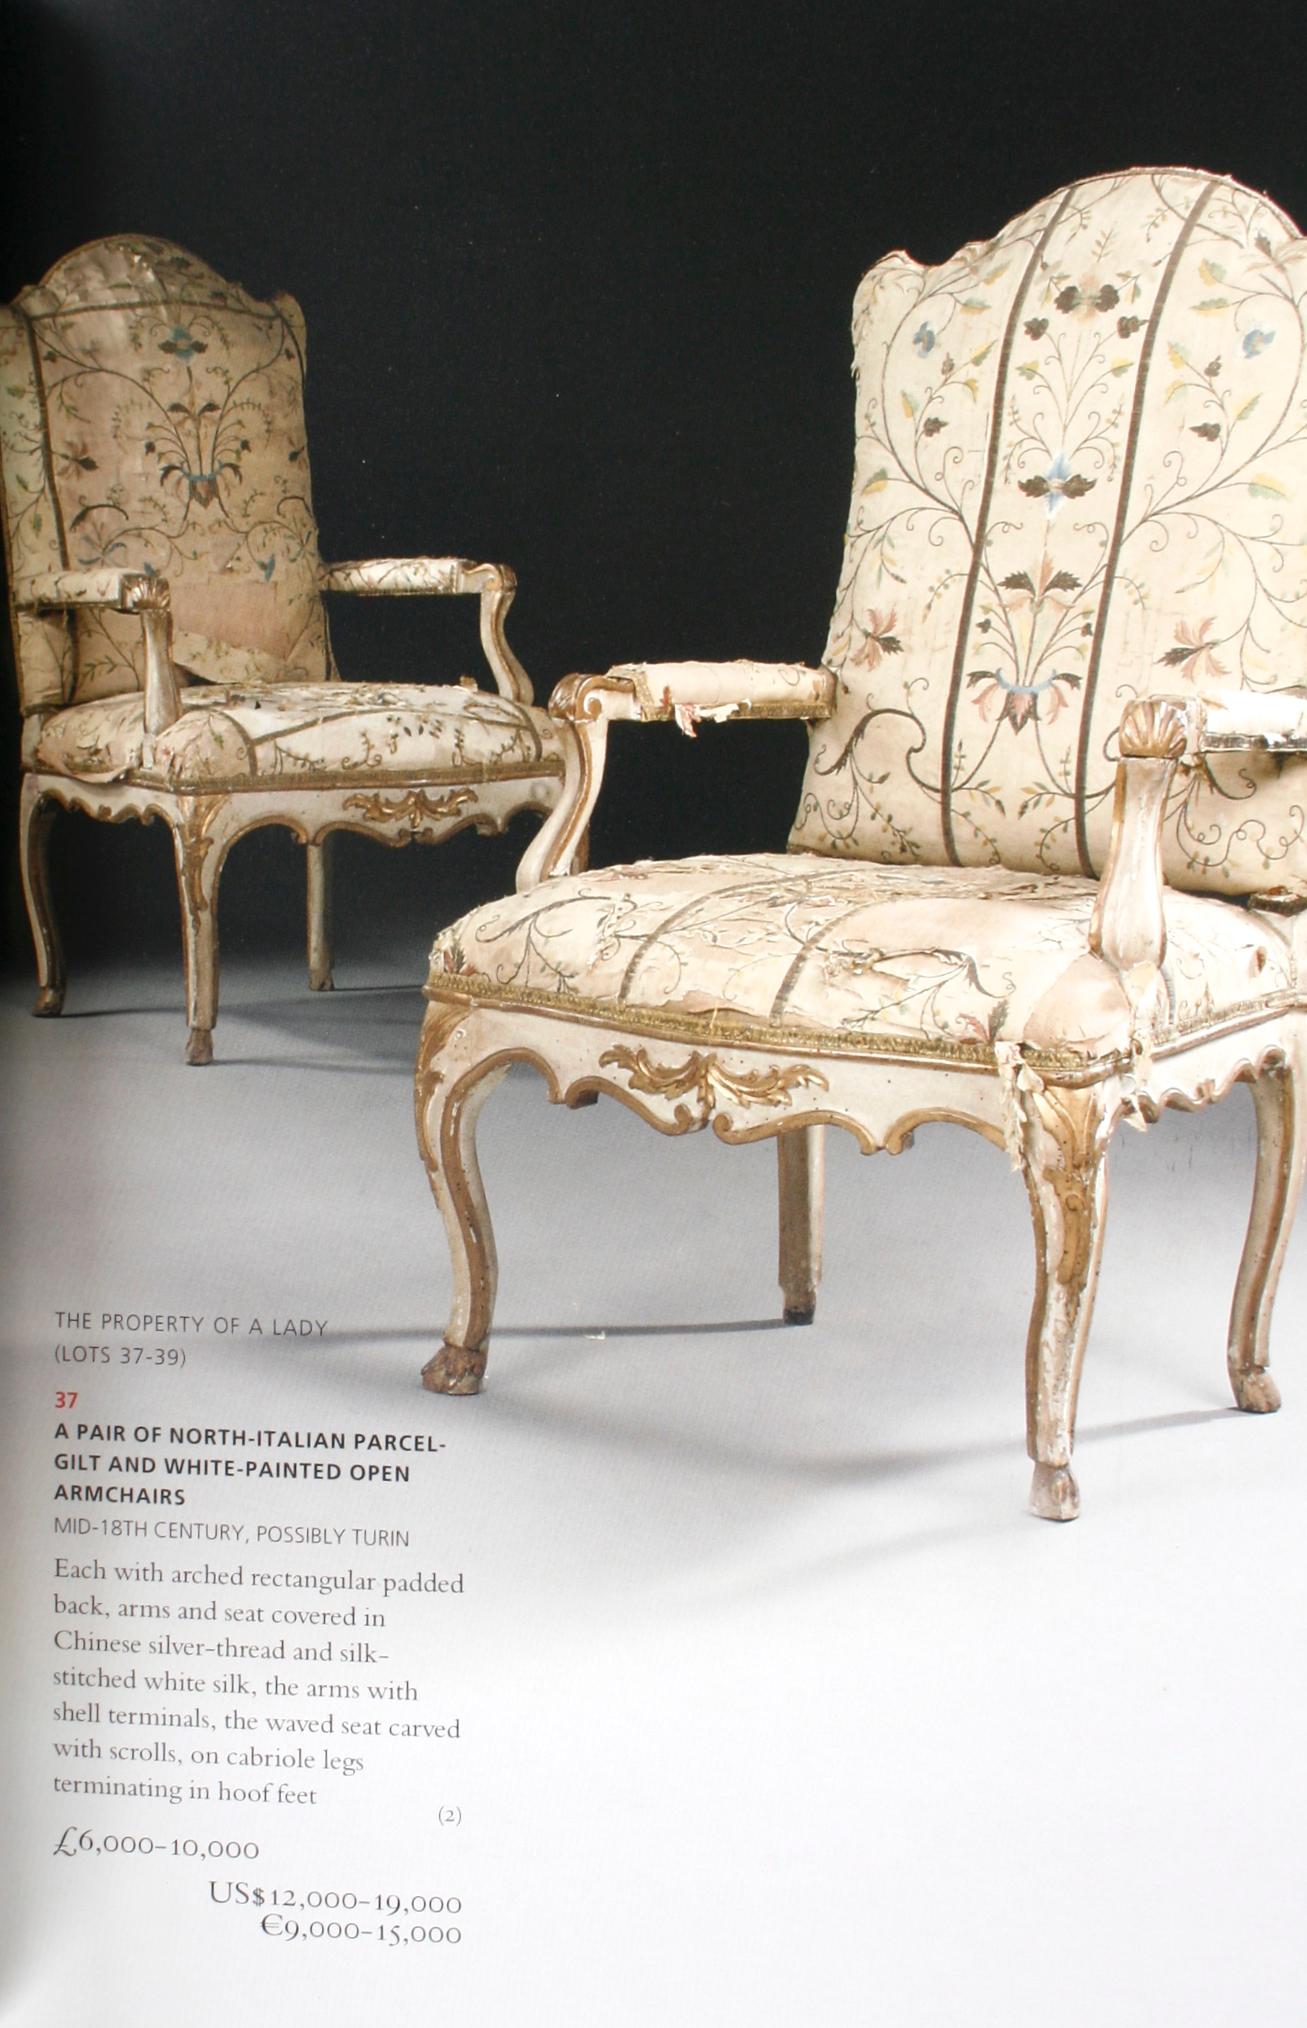 Paper Christie's, Important European Furniture Sculpture and Carpets, Beit Collection For Sale